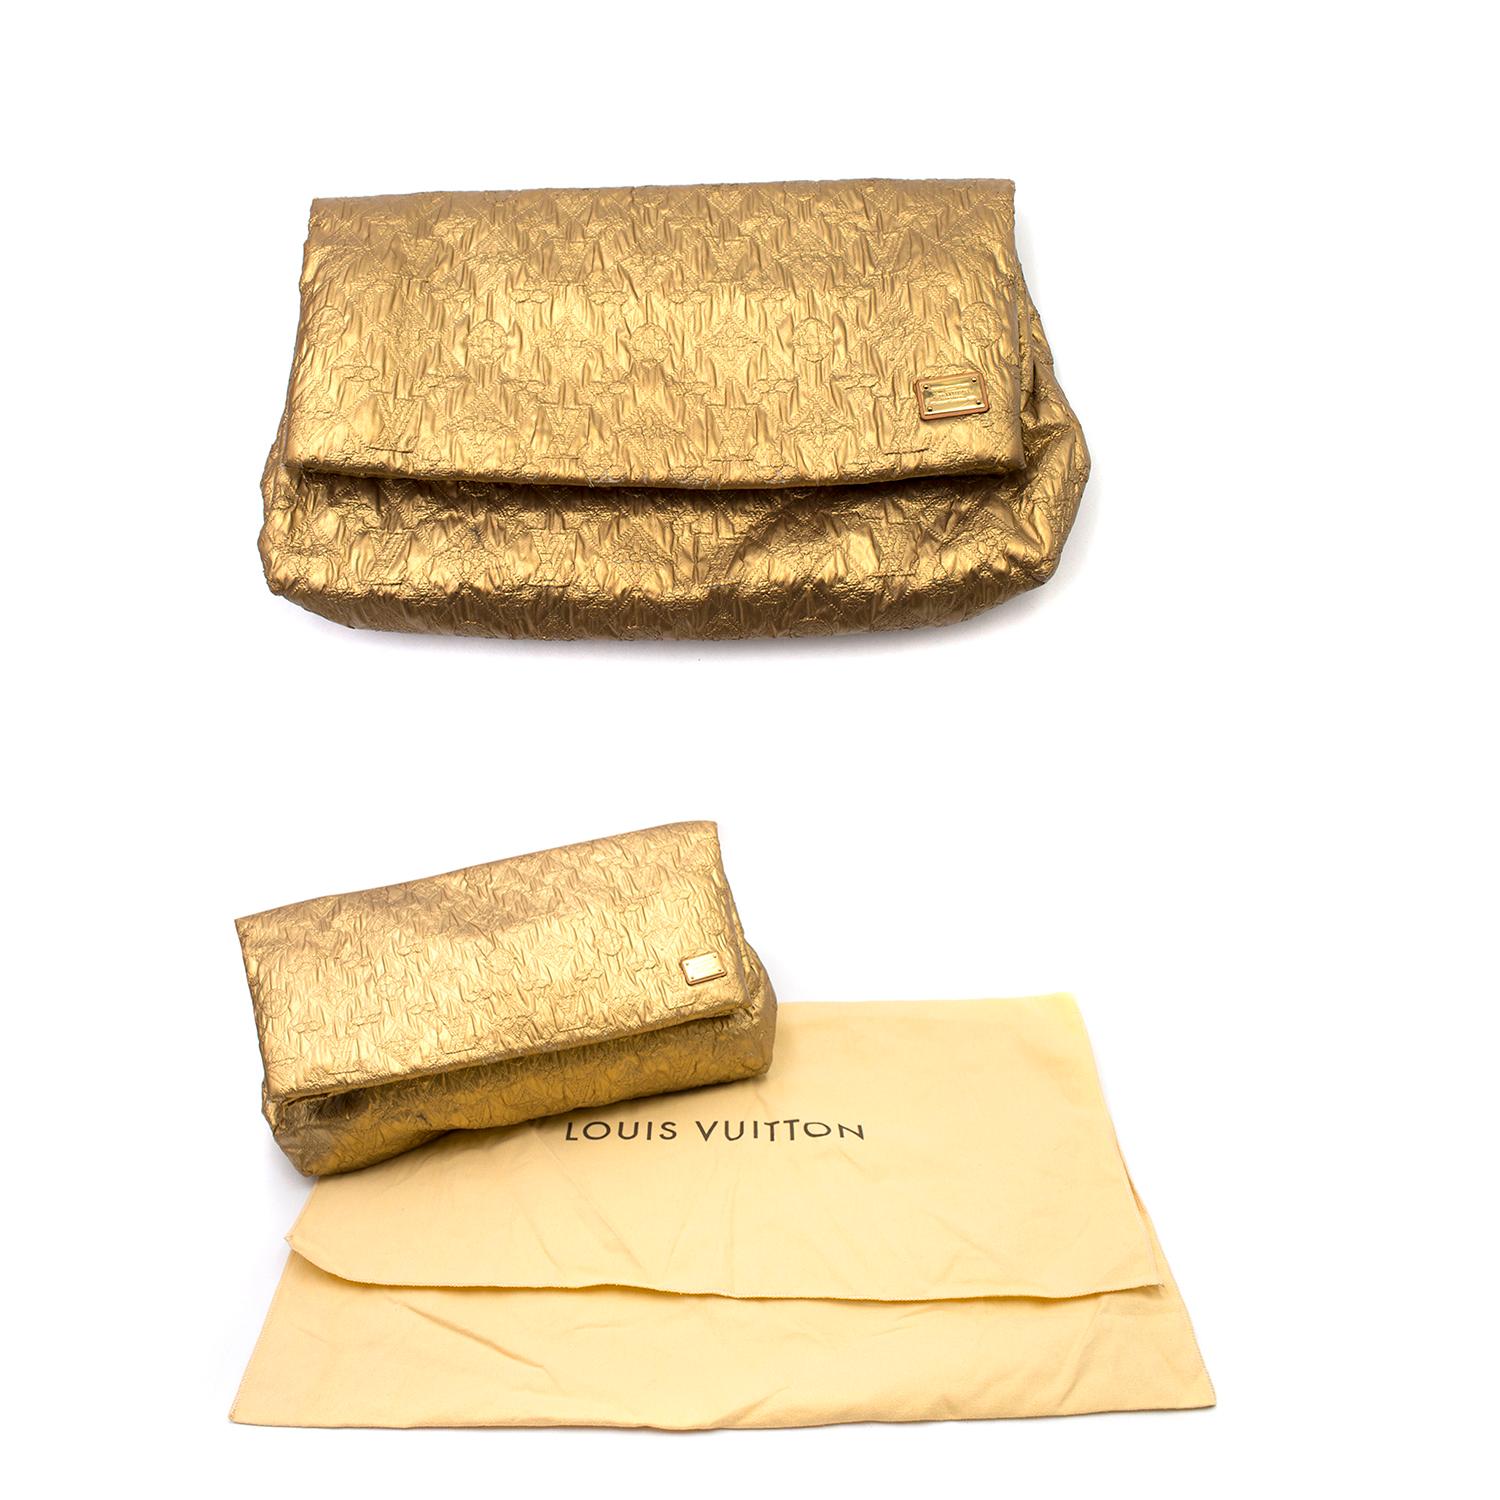 Louis Vuitton Metallic Limelight Clutch 

- Foldover clutch style
- Gold-tone metallic quilted monogram textile
- Gold-tone metal engraved plaque on the left of the front
- Magnetic popper closure
- Internal zip compartment
- Very spacious
- Comes